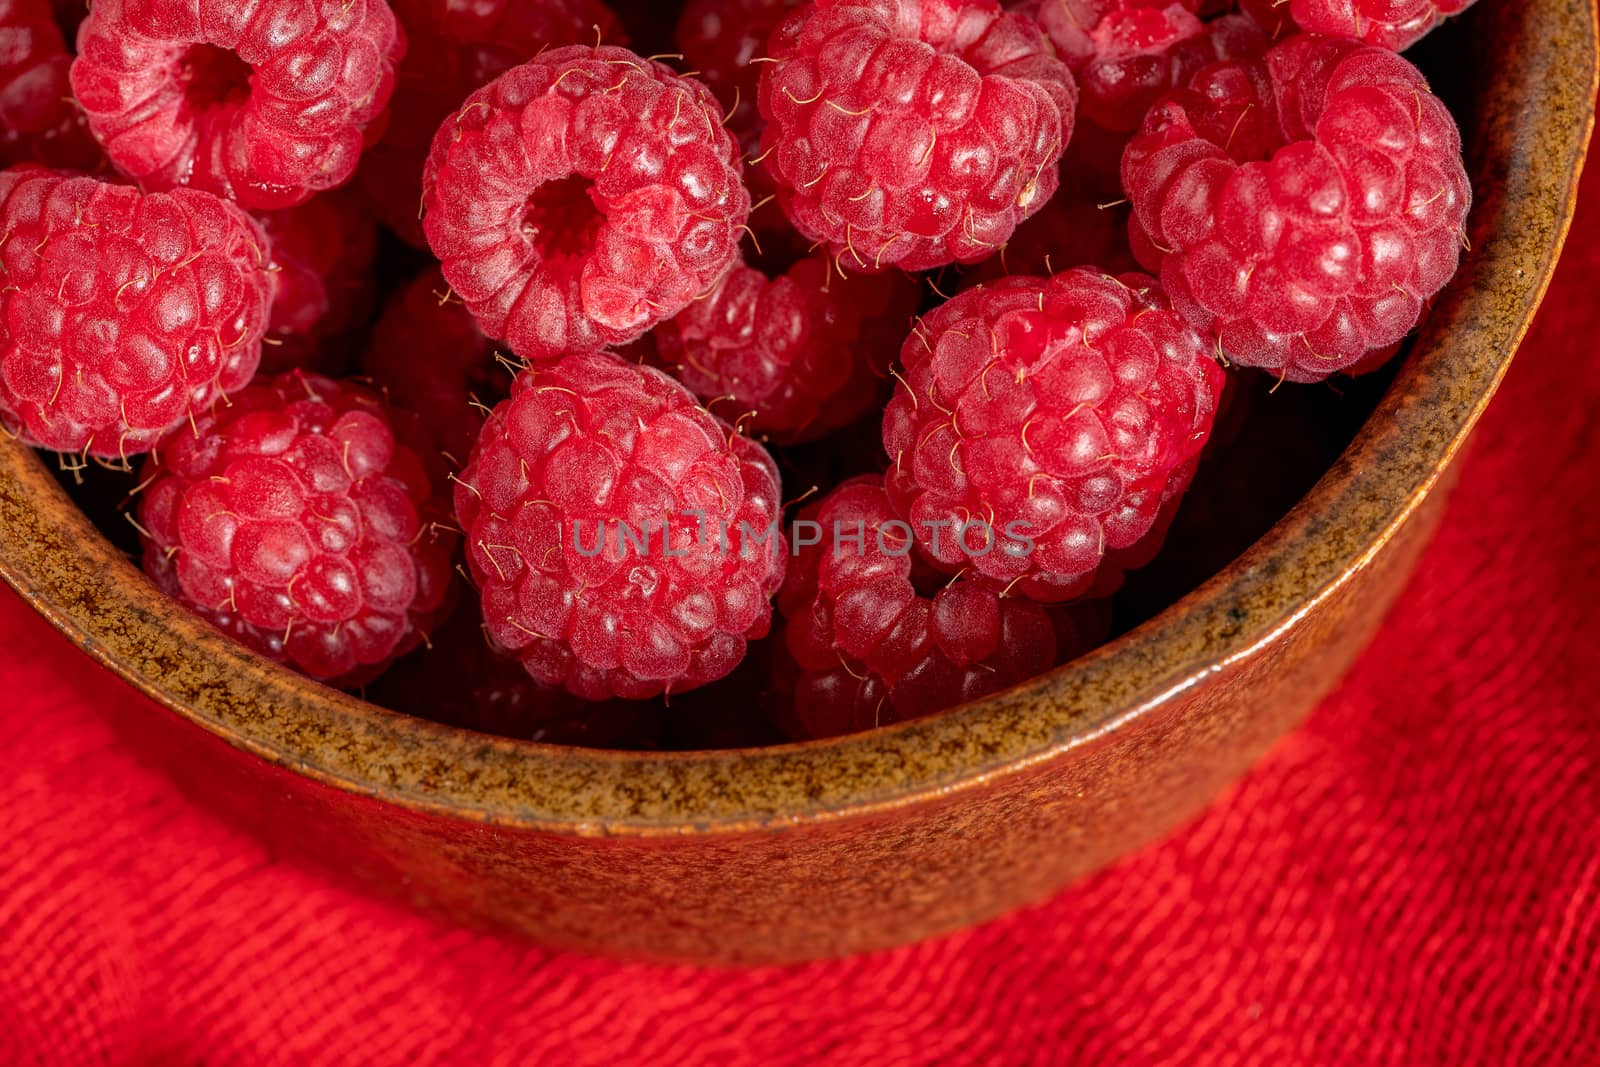 A clay bowl filled with red raspberries by 84kamila